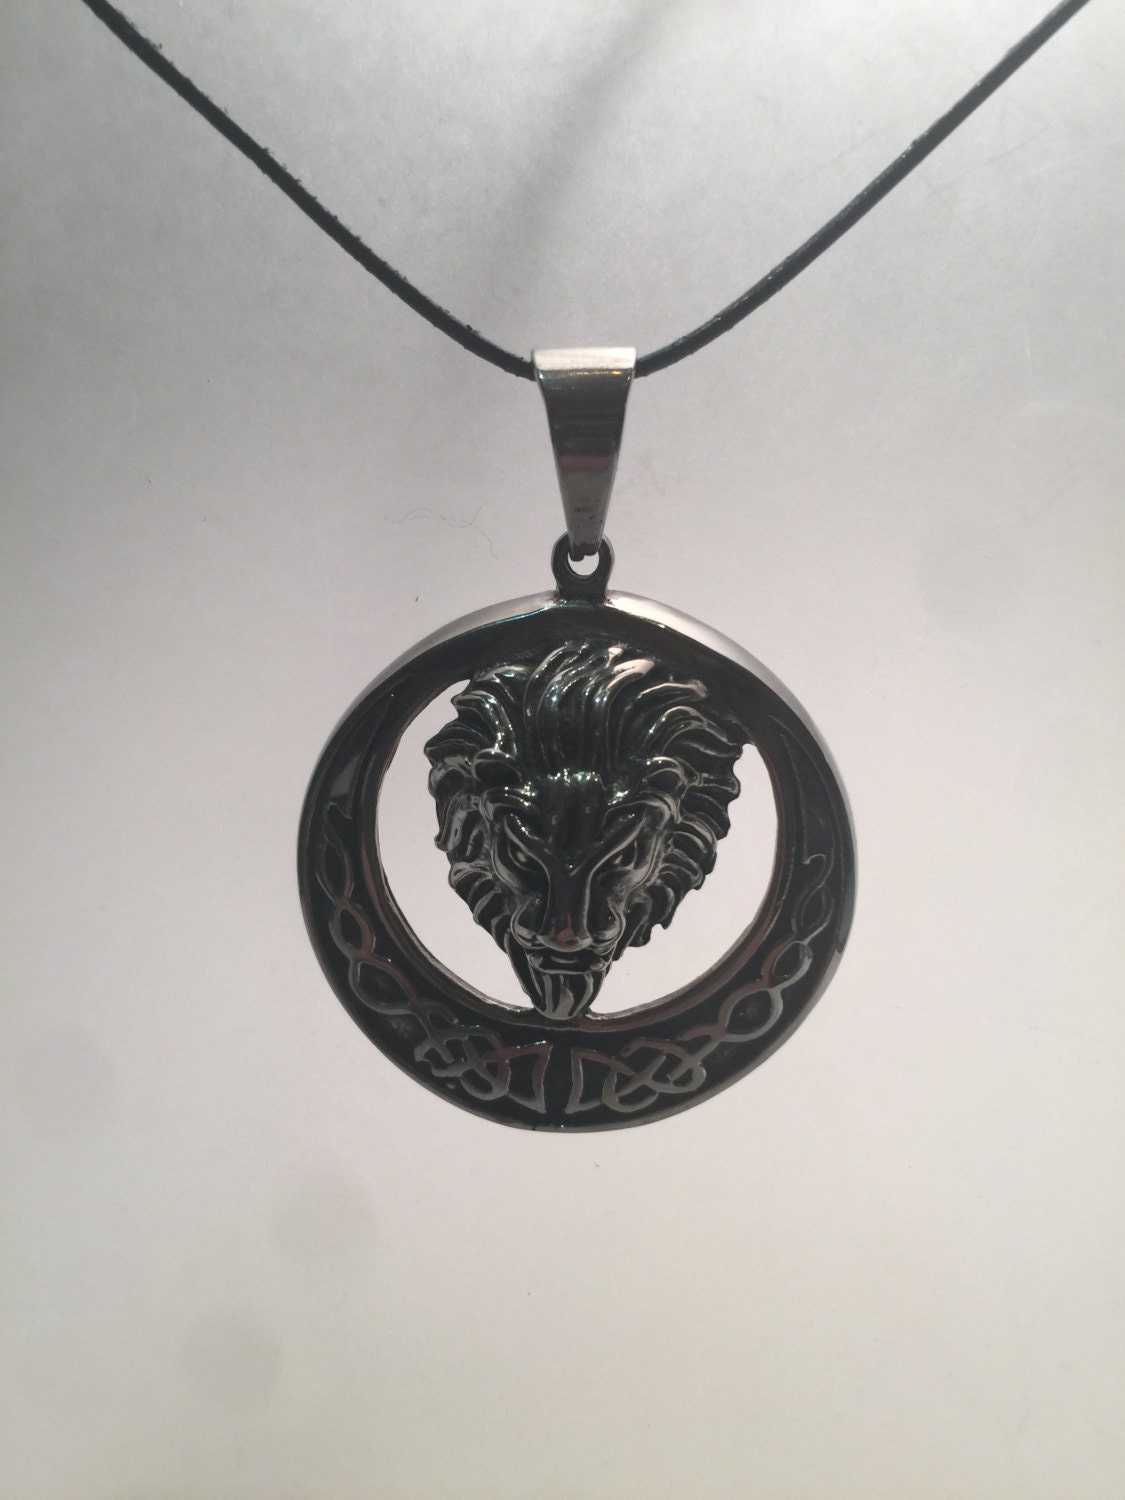 Vintage Handmade Silver Stainless Steel Gothic Celtic Lion Pendant Necklace